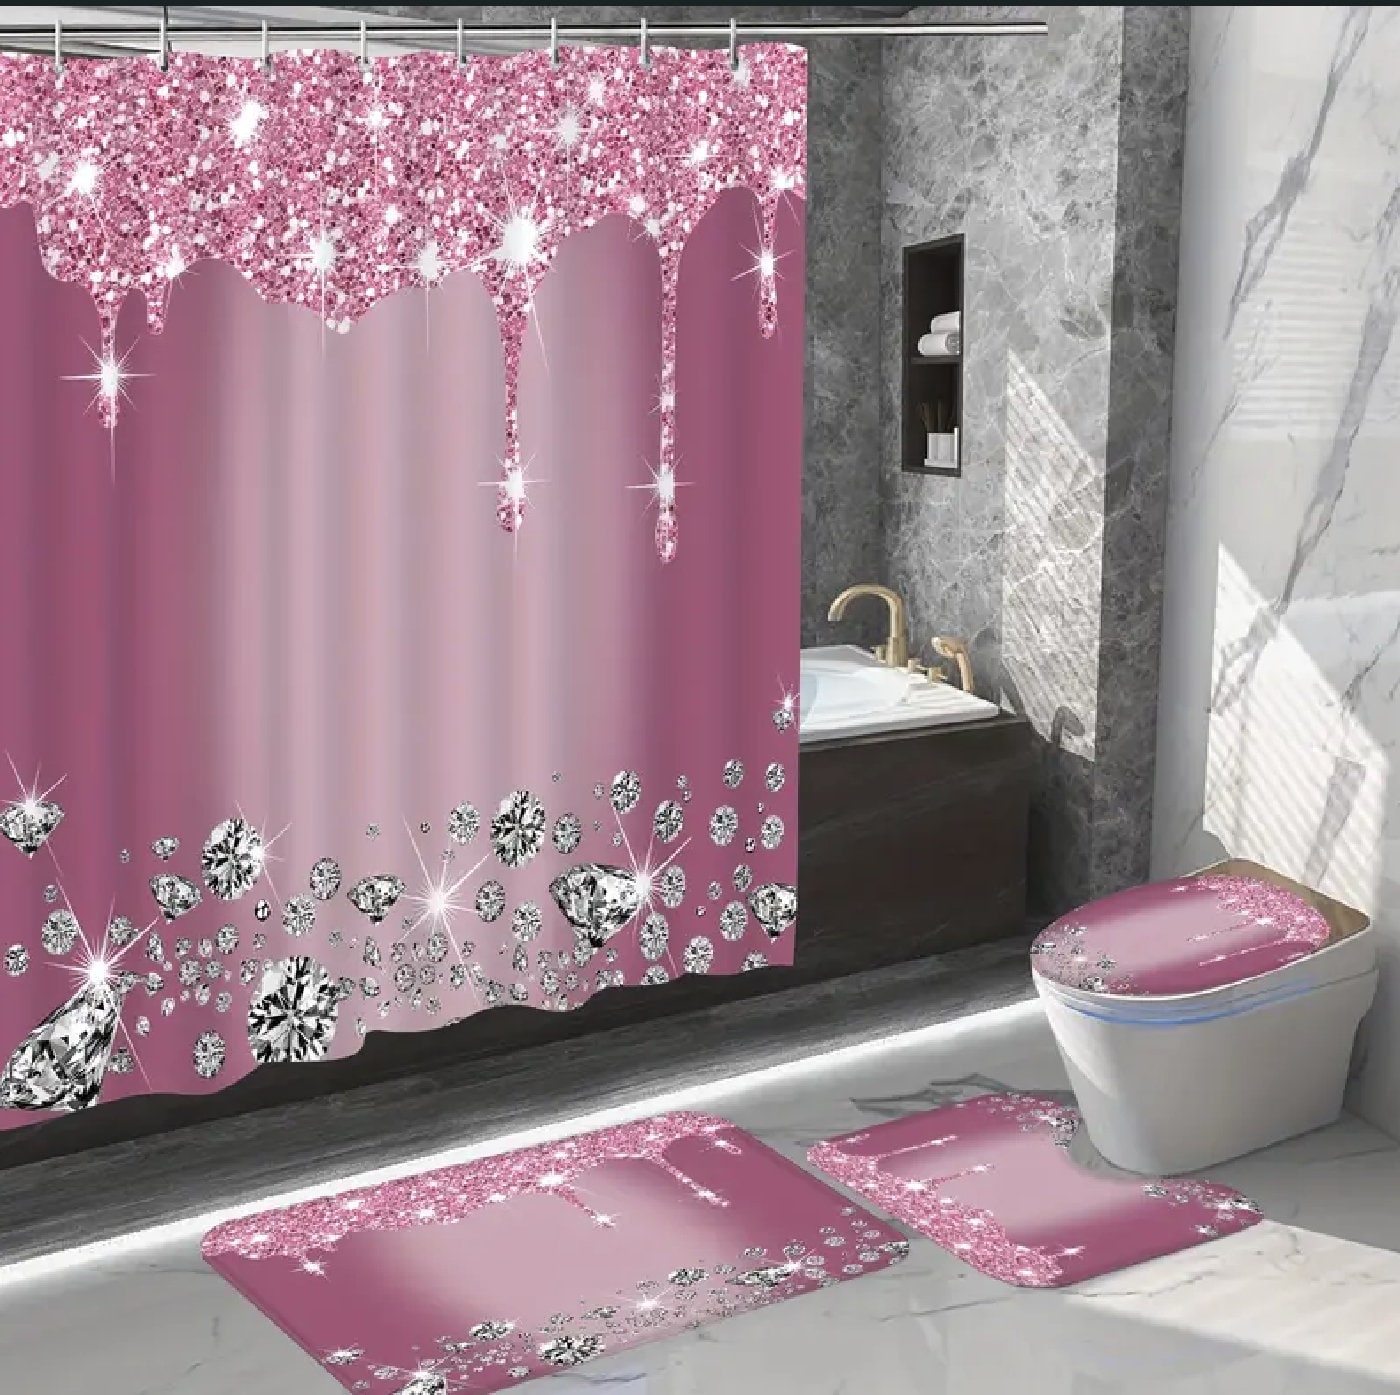  JGHPP 4 Piece Shower Curtain Sets with Non-Slip Rugs